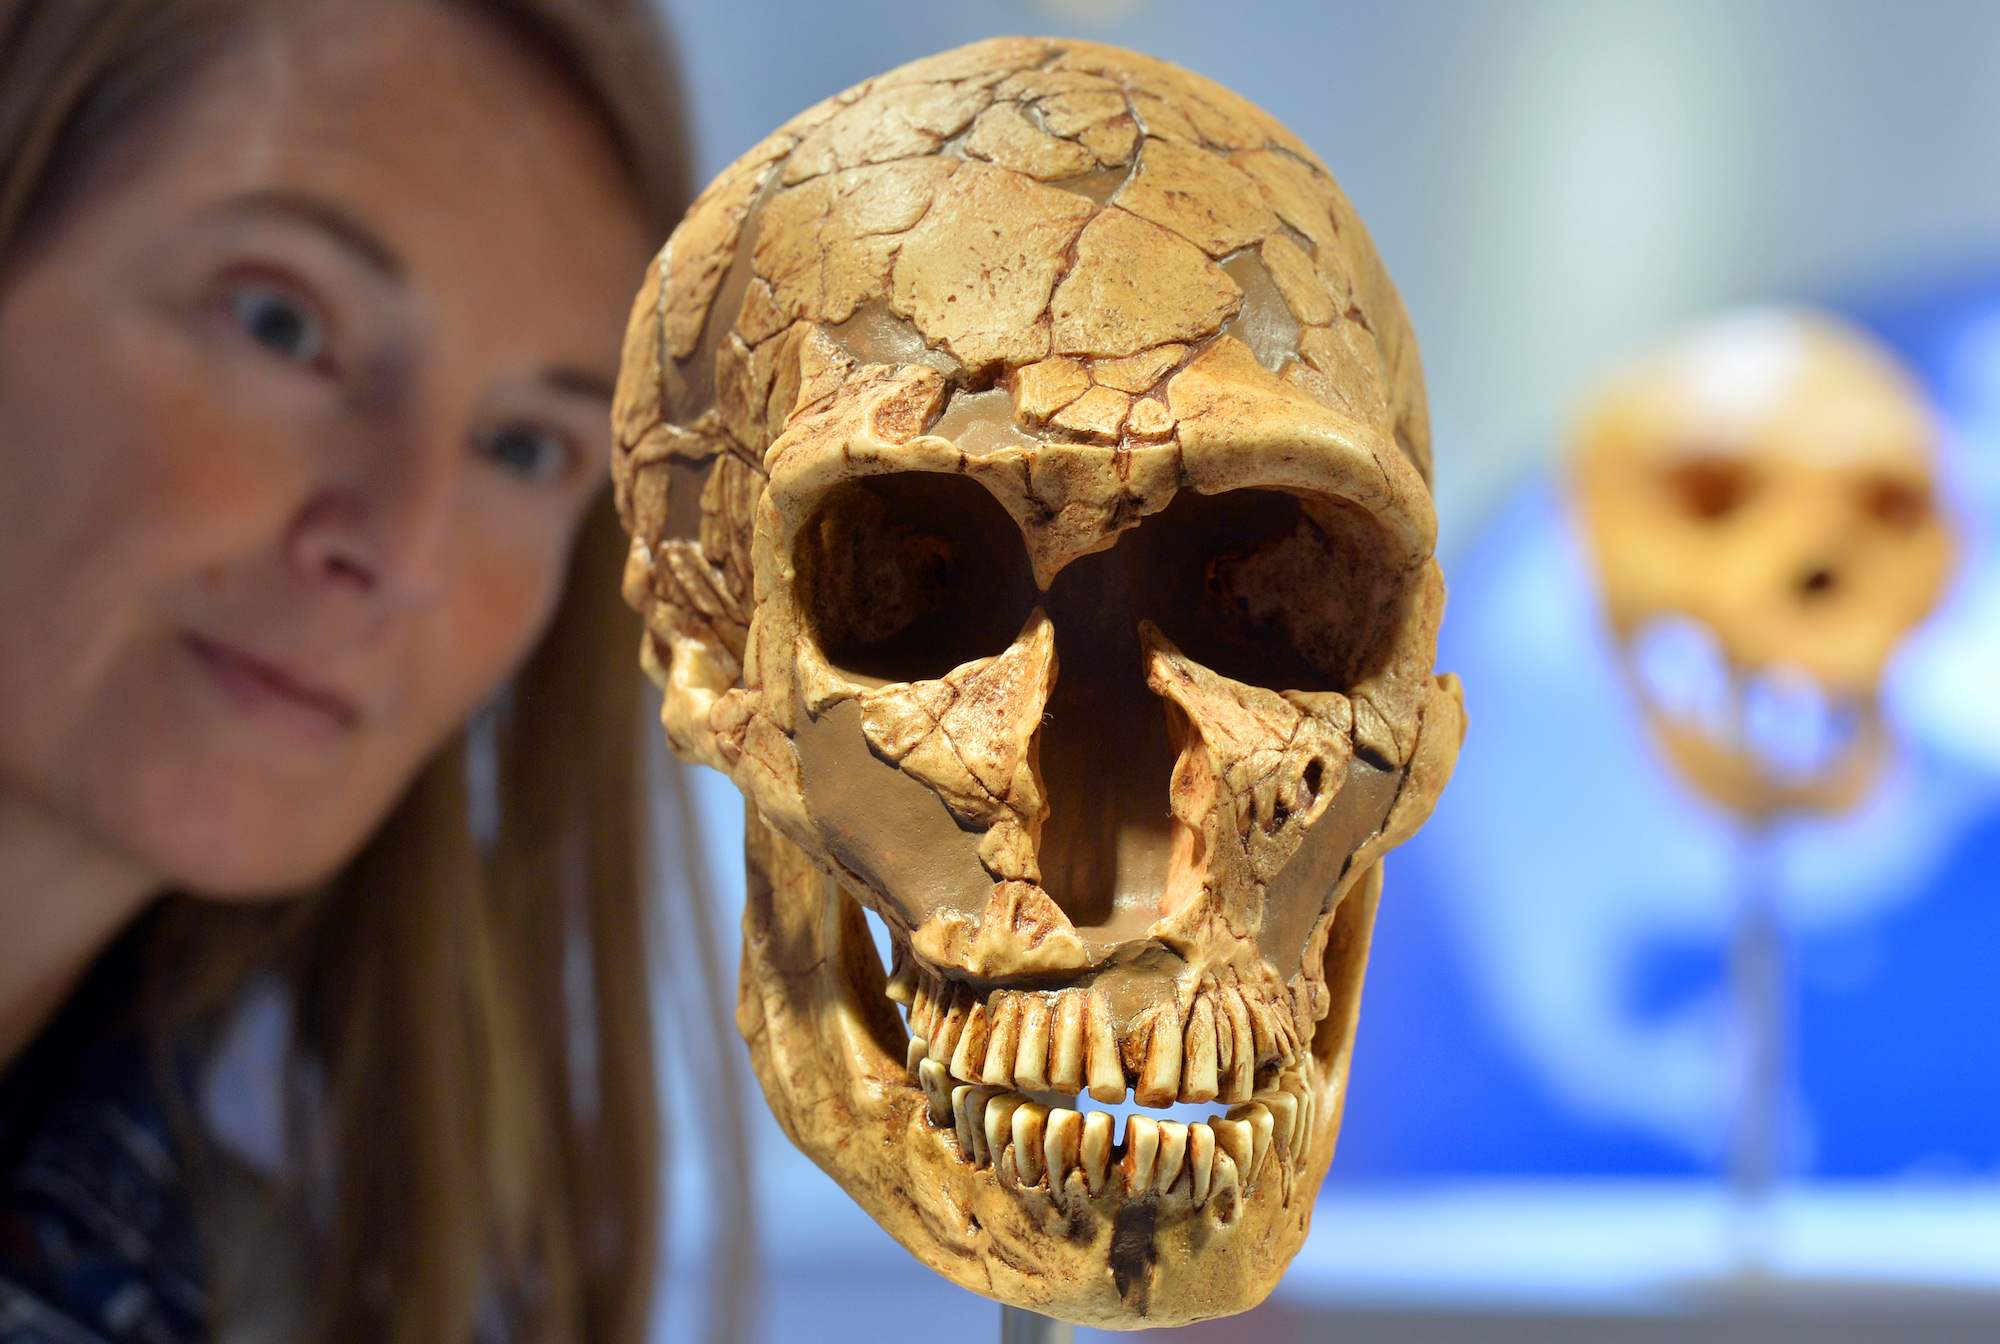 Museum educator Sabine Liener-Kraft looks at the replica of a skull of a Neanderthal a day before the official opening of the new State Museum of Archeology in Chemnitz, Germany, 14 May 2014. About 6,000 exhibits shed light on 300,000 years of human history. The conversion of the building from a shopping center into the museum cost 31 million Euro with another 13,5 million for the permanent exhibition. Photo: HENDRIK SCHMIDT/dpa | usage worldwide (Photo by Hendrik Schmidt/picture alliance via Getty Images)